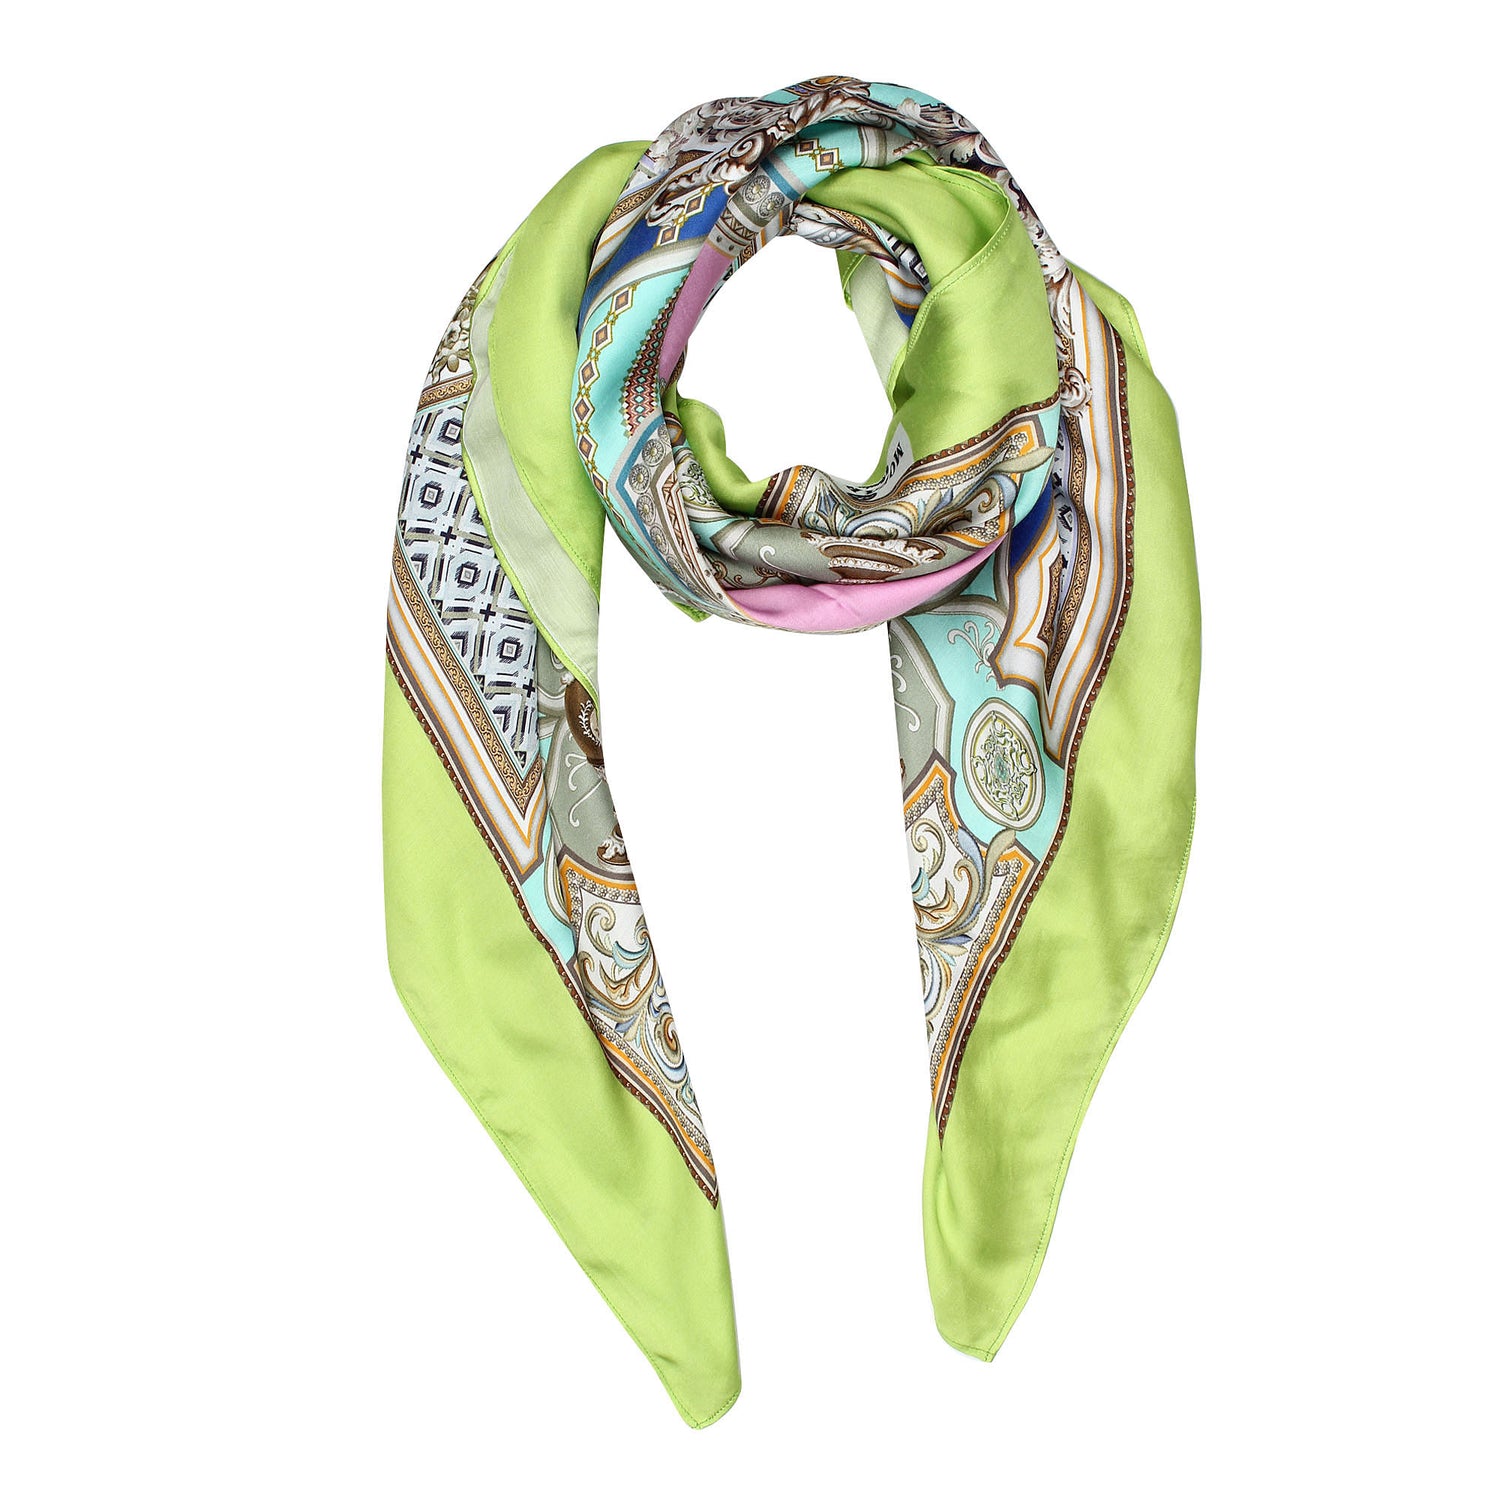 square scarf, silk scarves for women, printed scarfs, scarves